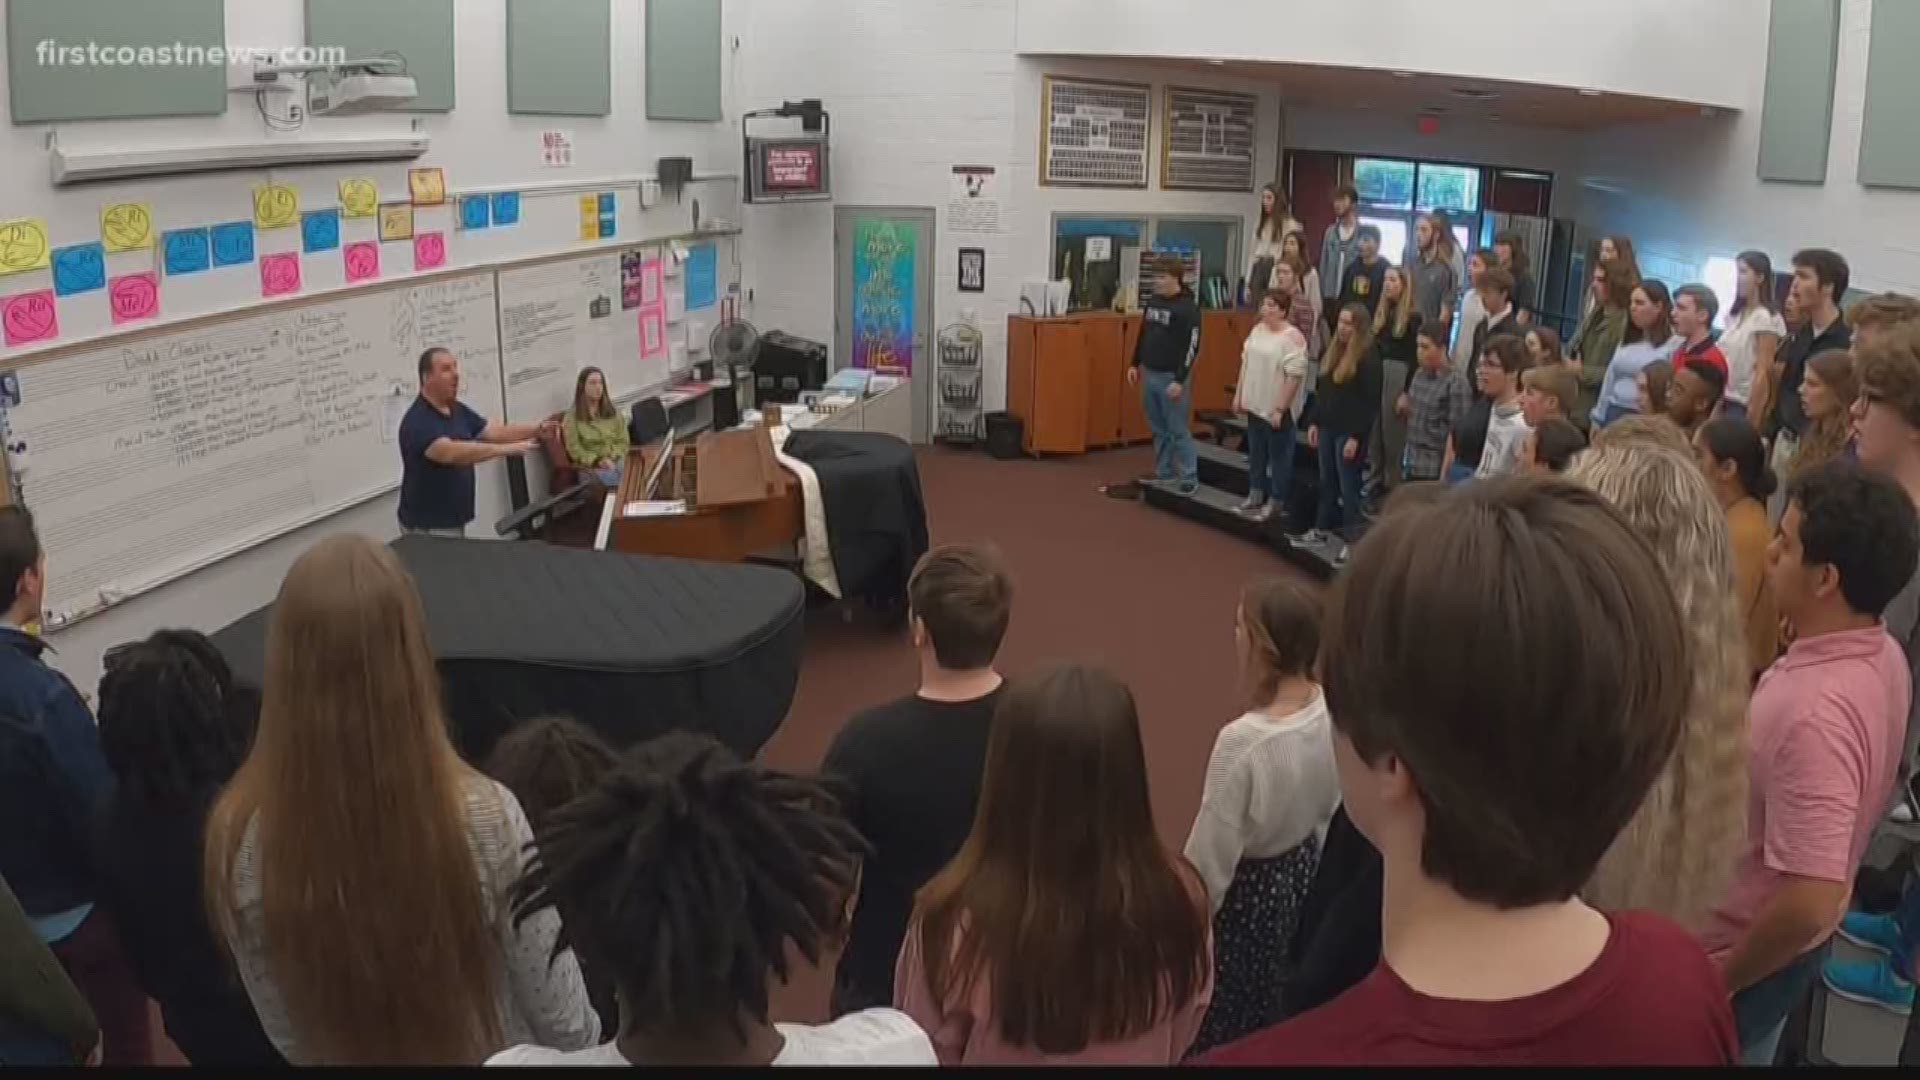 In less than two weeks, Choir Director Jeff Dodd's emotions went from elation to disappointment.